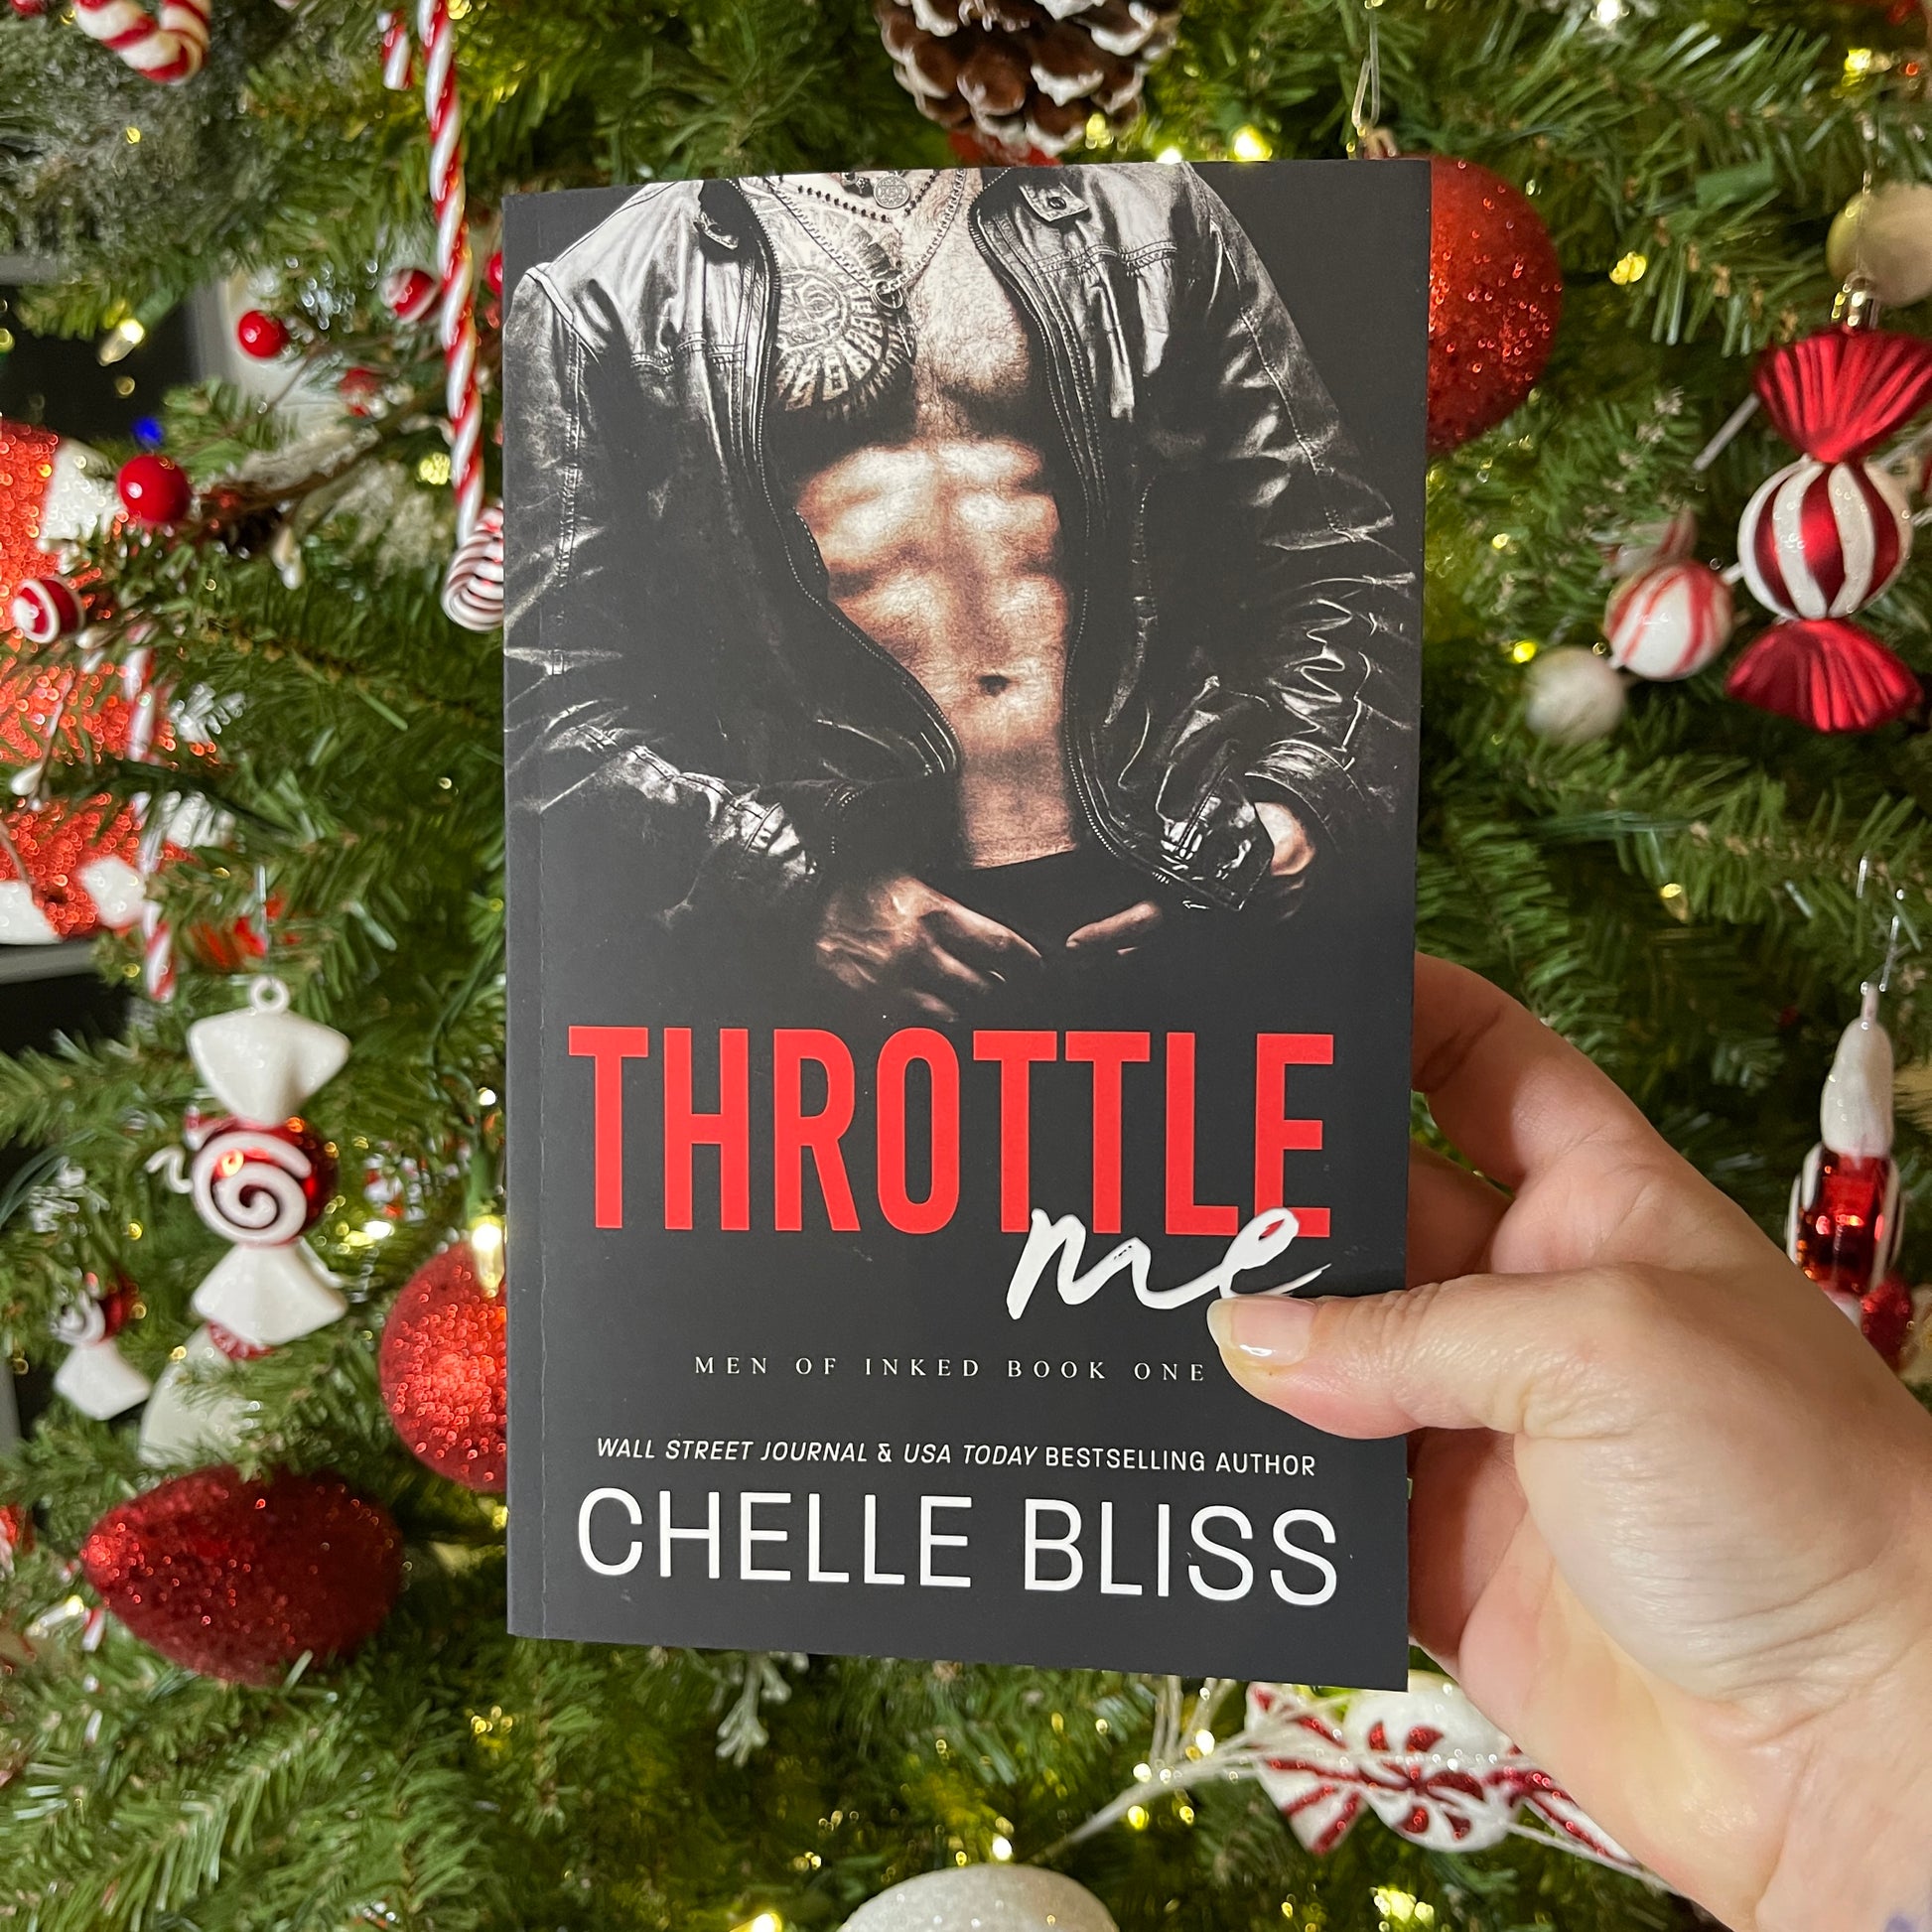 throttle me paperback book by chelle bliss man in leather jacket 